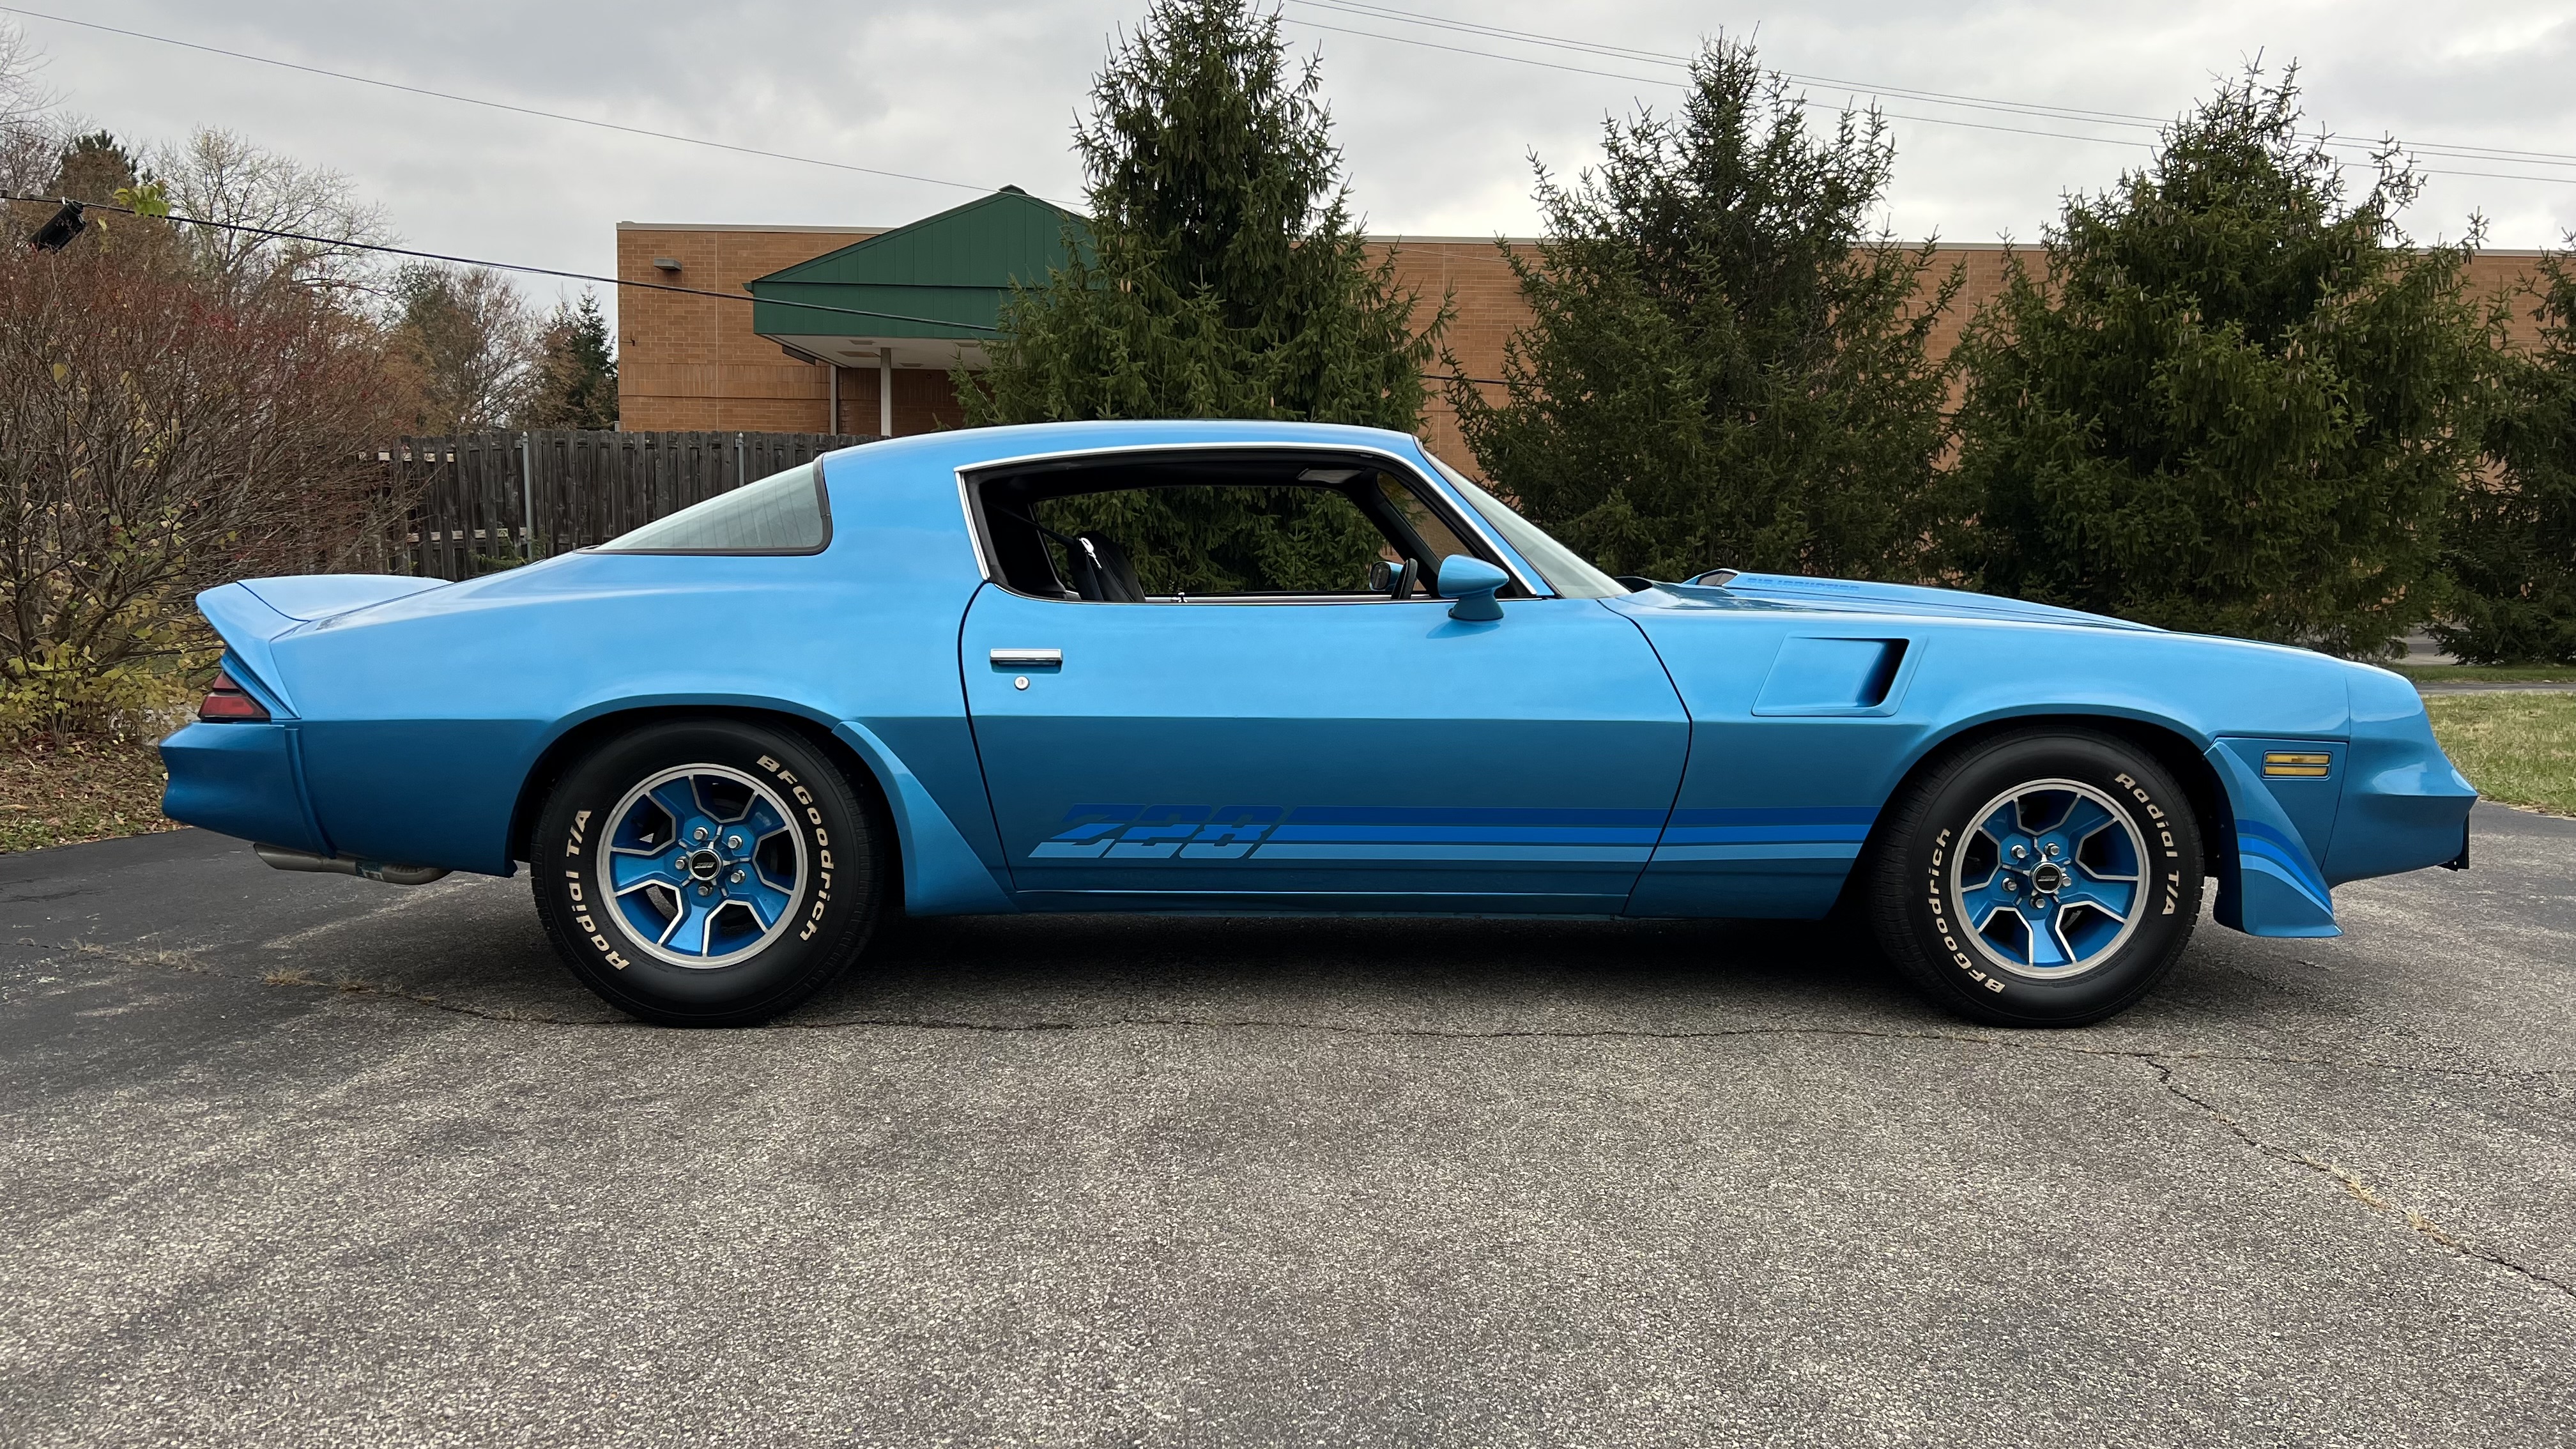 1981 Chevy Z28, 4 Speed, Blue over Black, Sold!